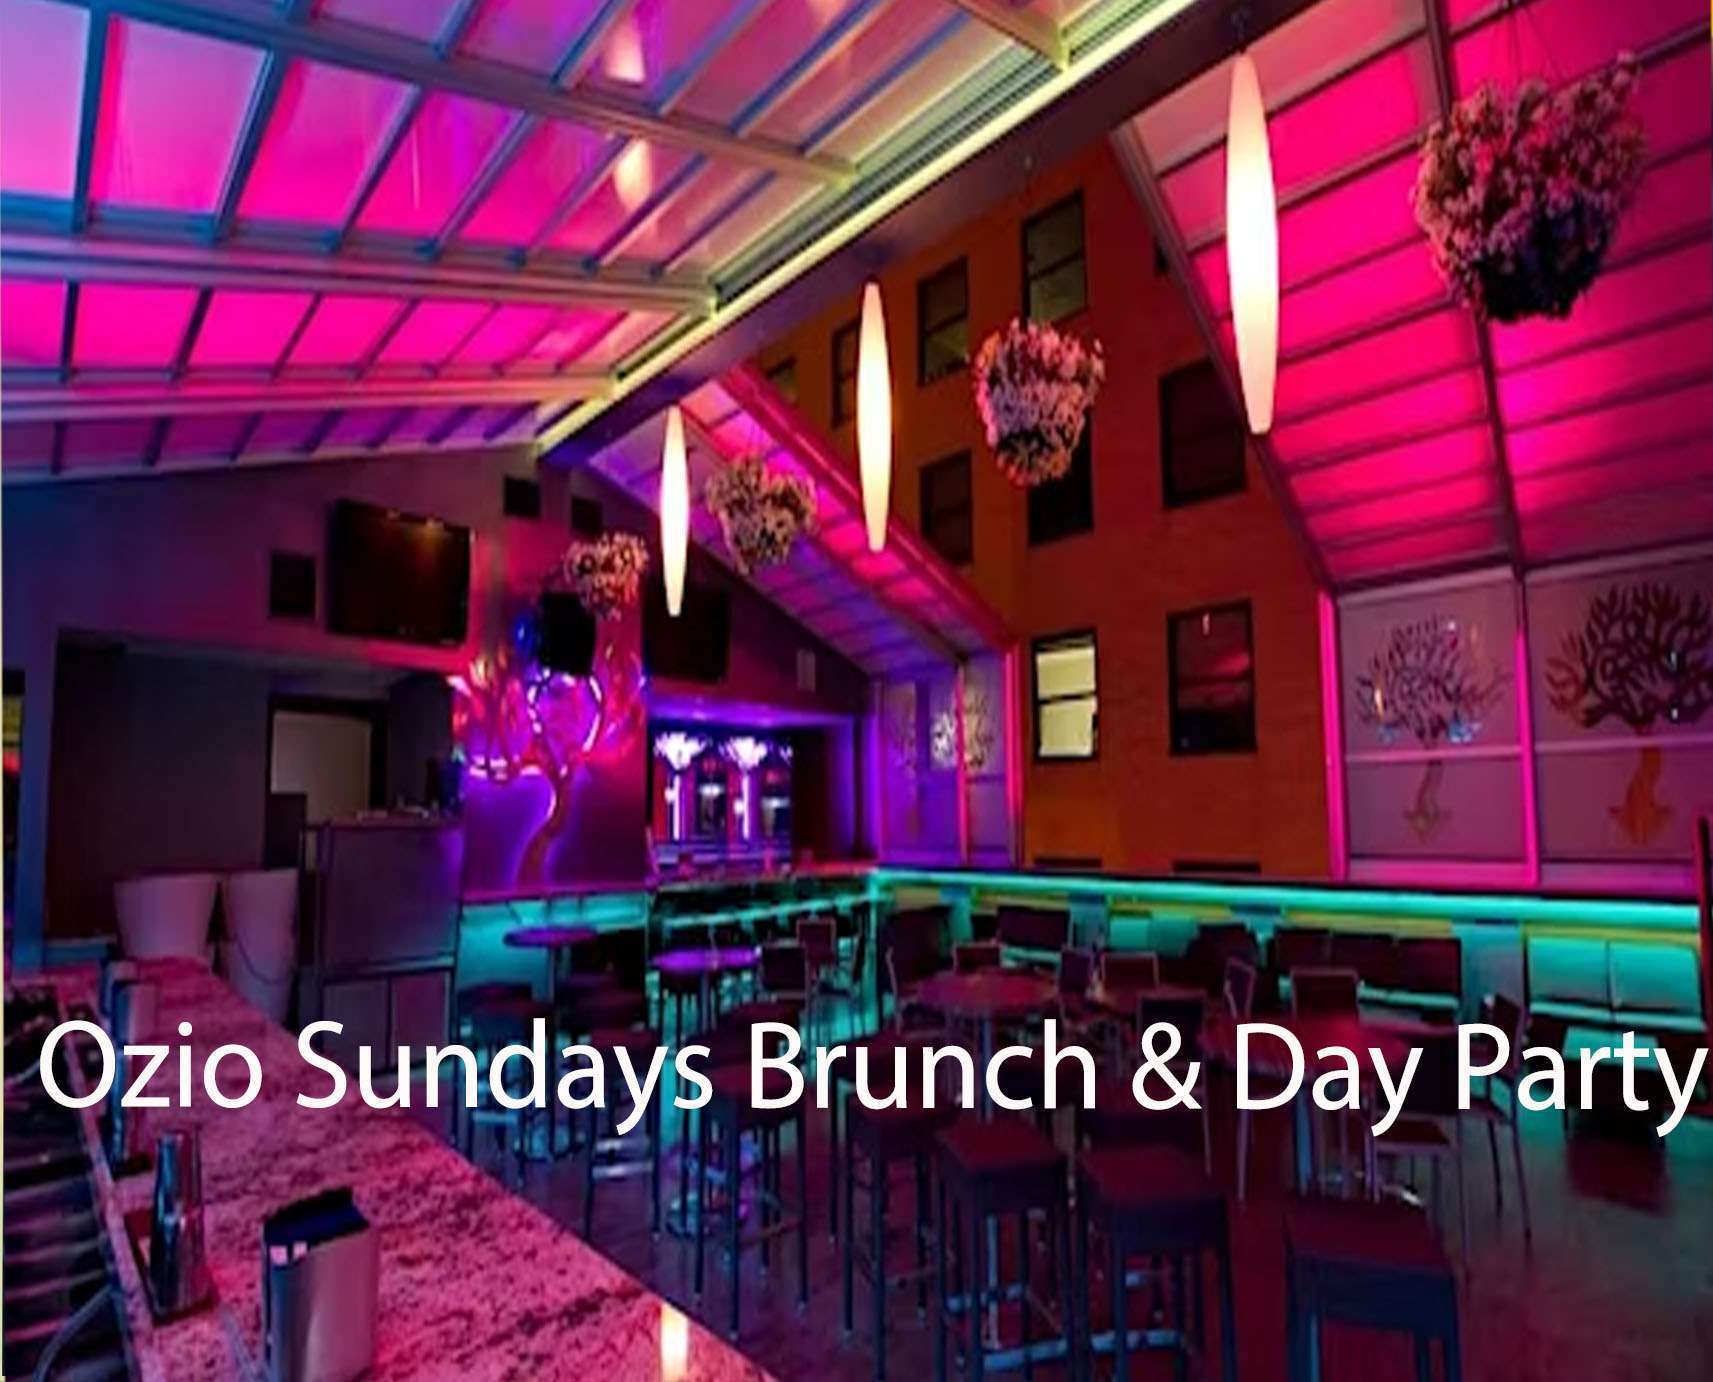 The Ozio Sundays Brunch & Day Party now 2022 Events